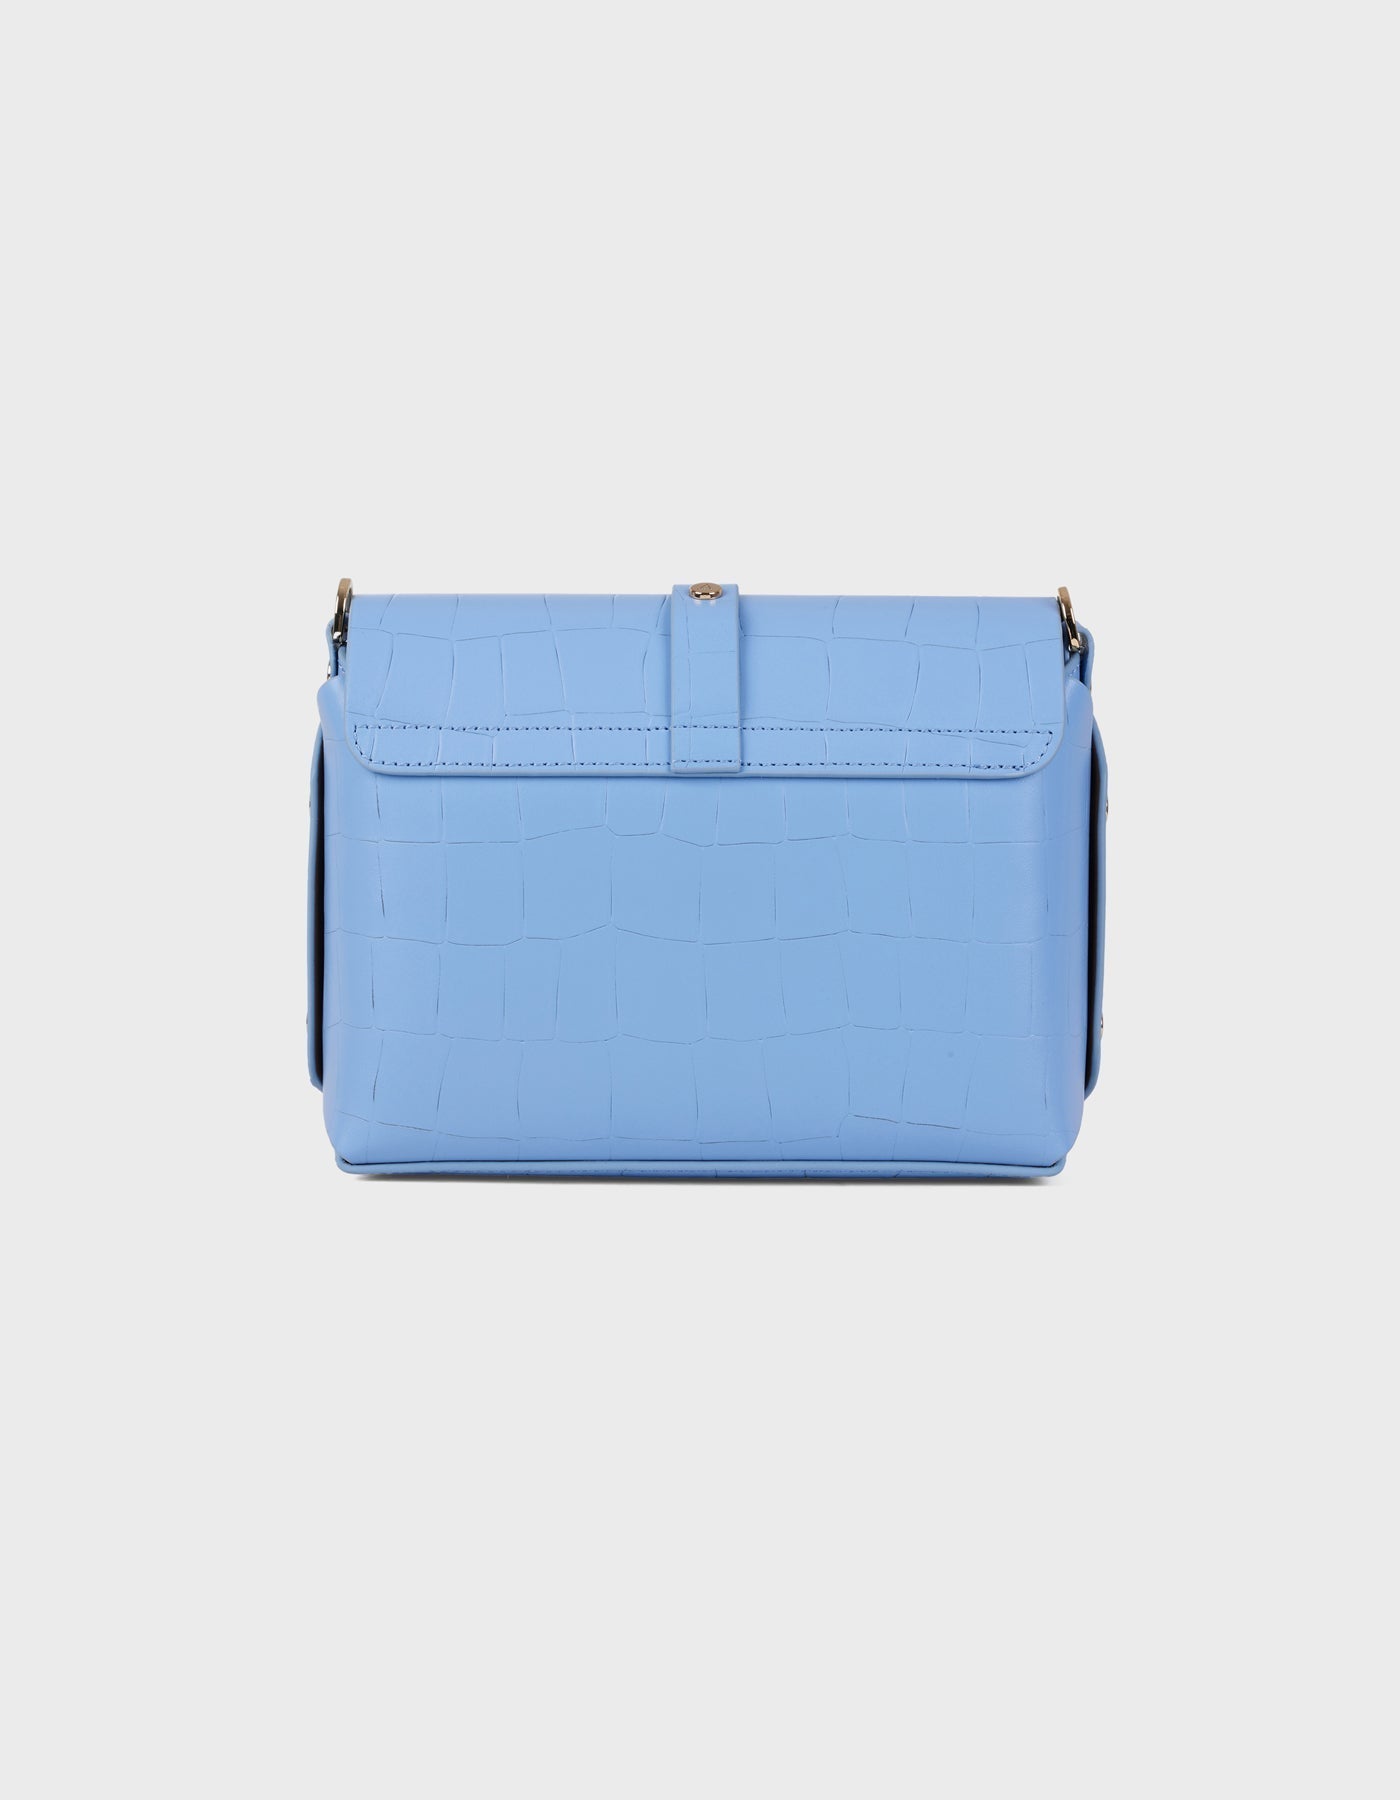 Hiva Atelier | Harmonia Shoulder Bag Croco Effect Tranquil Blue | Beautiful and Versatile Leather Accessories